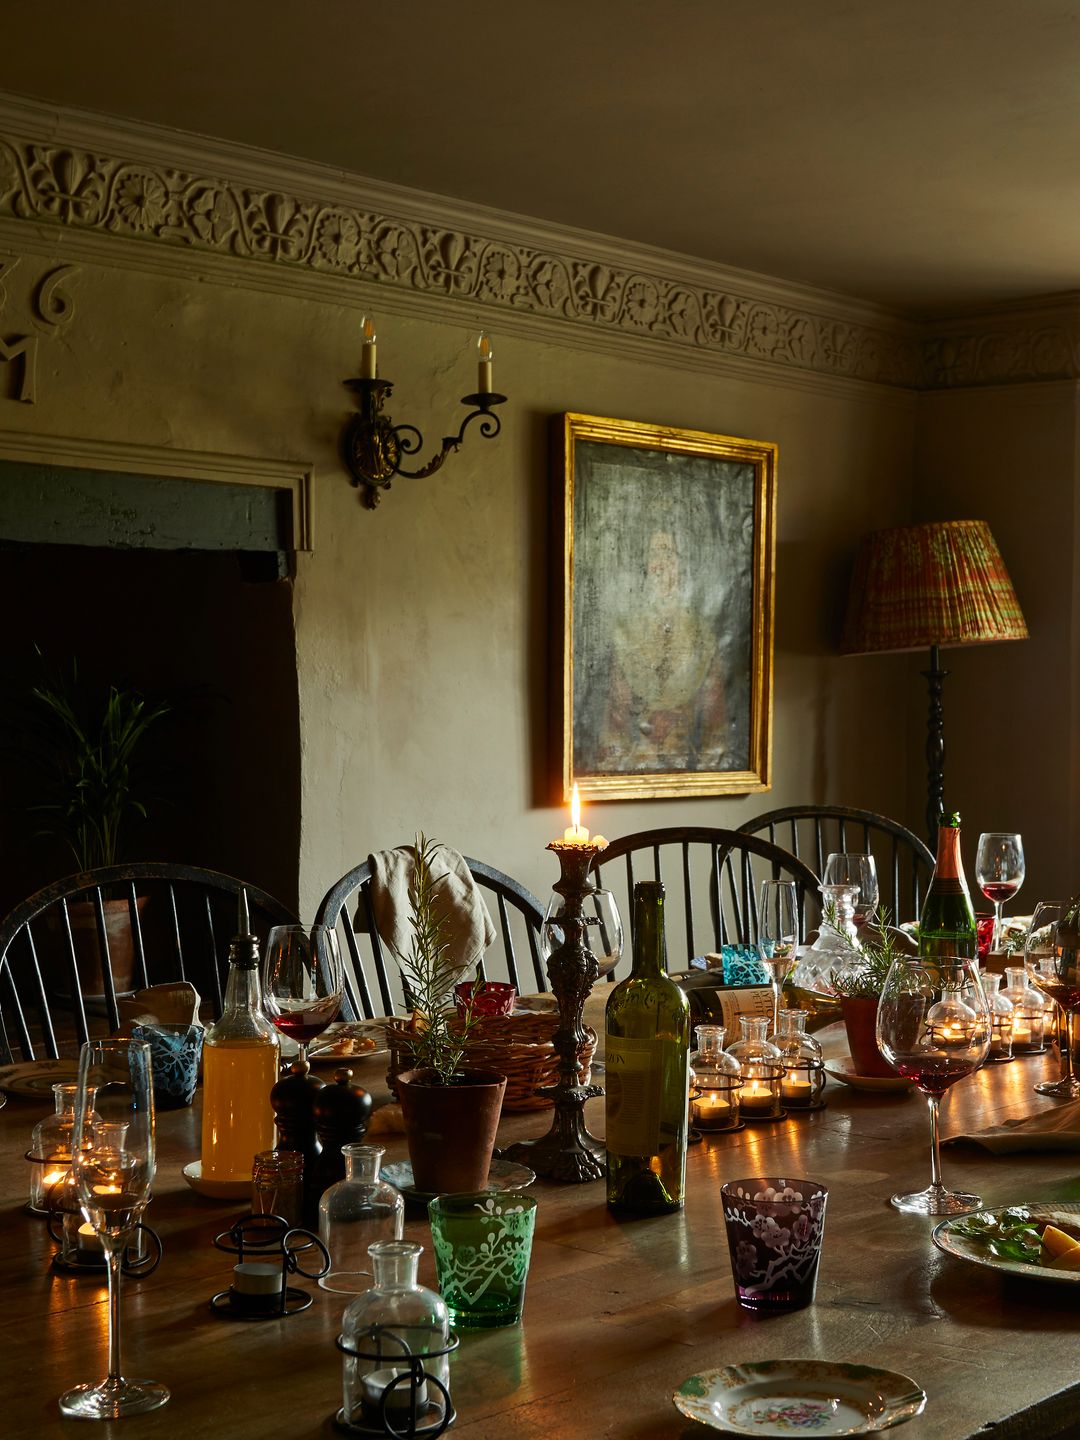 The dining room at The Pig Hotel